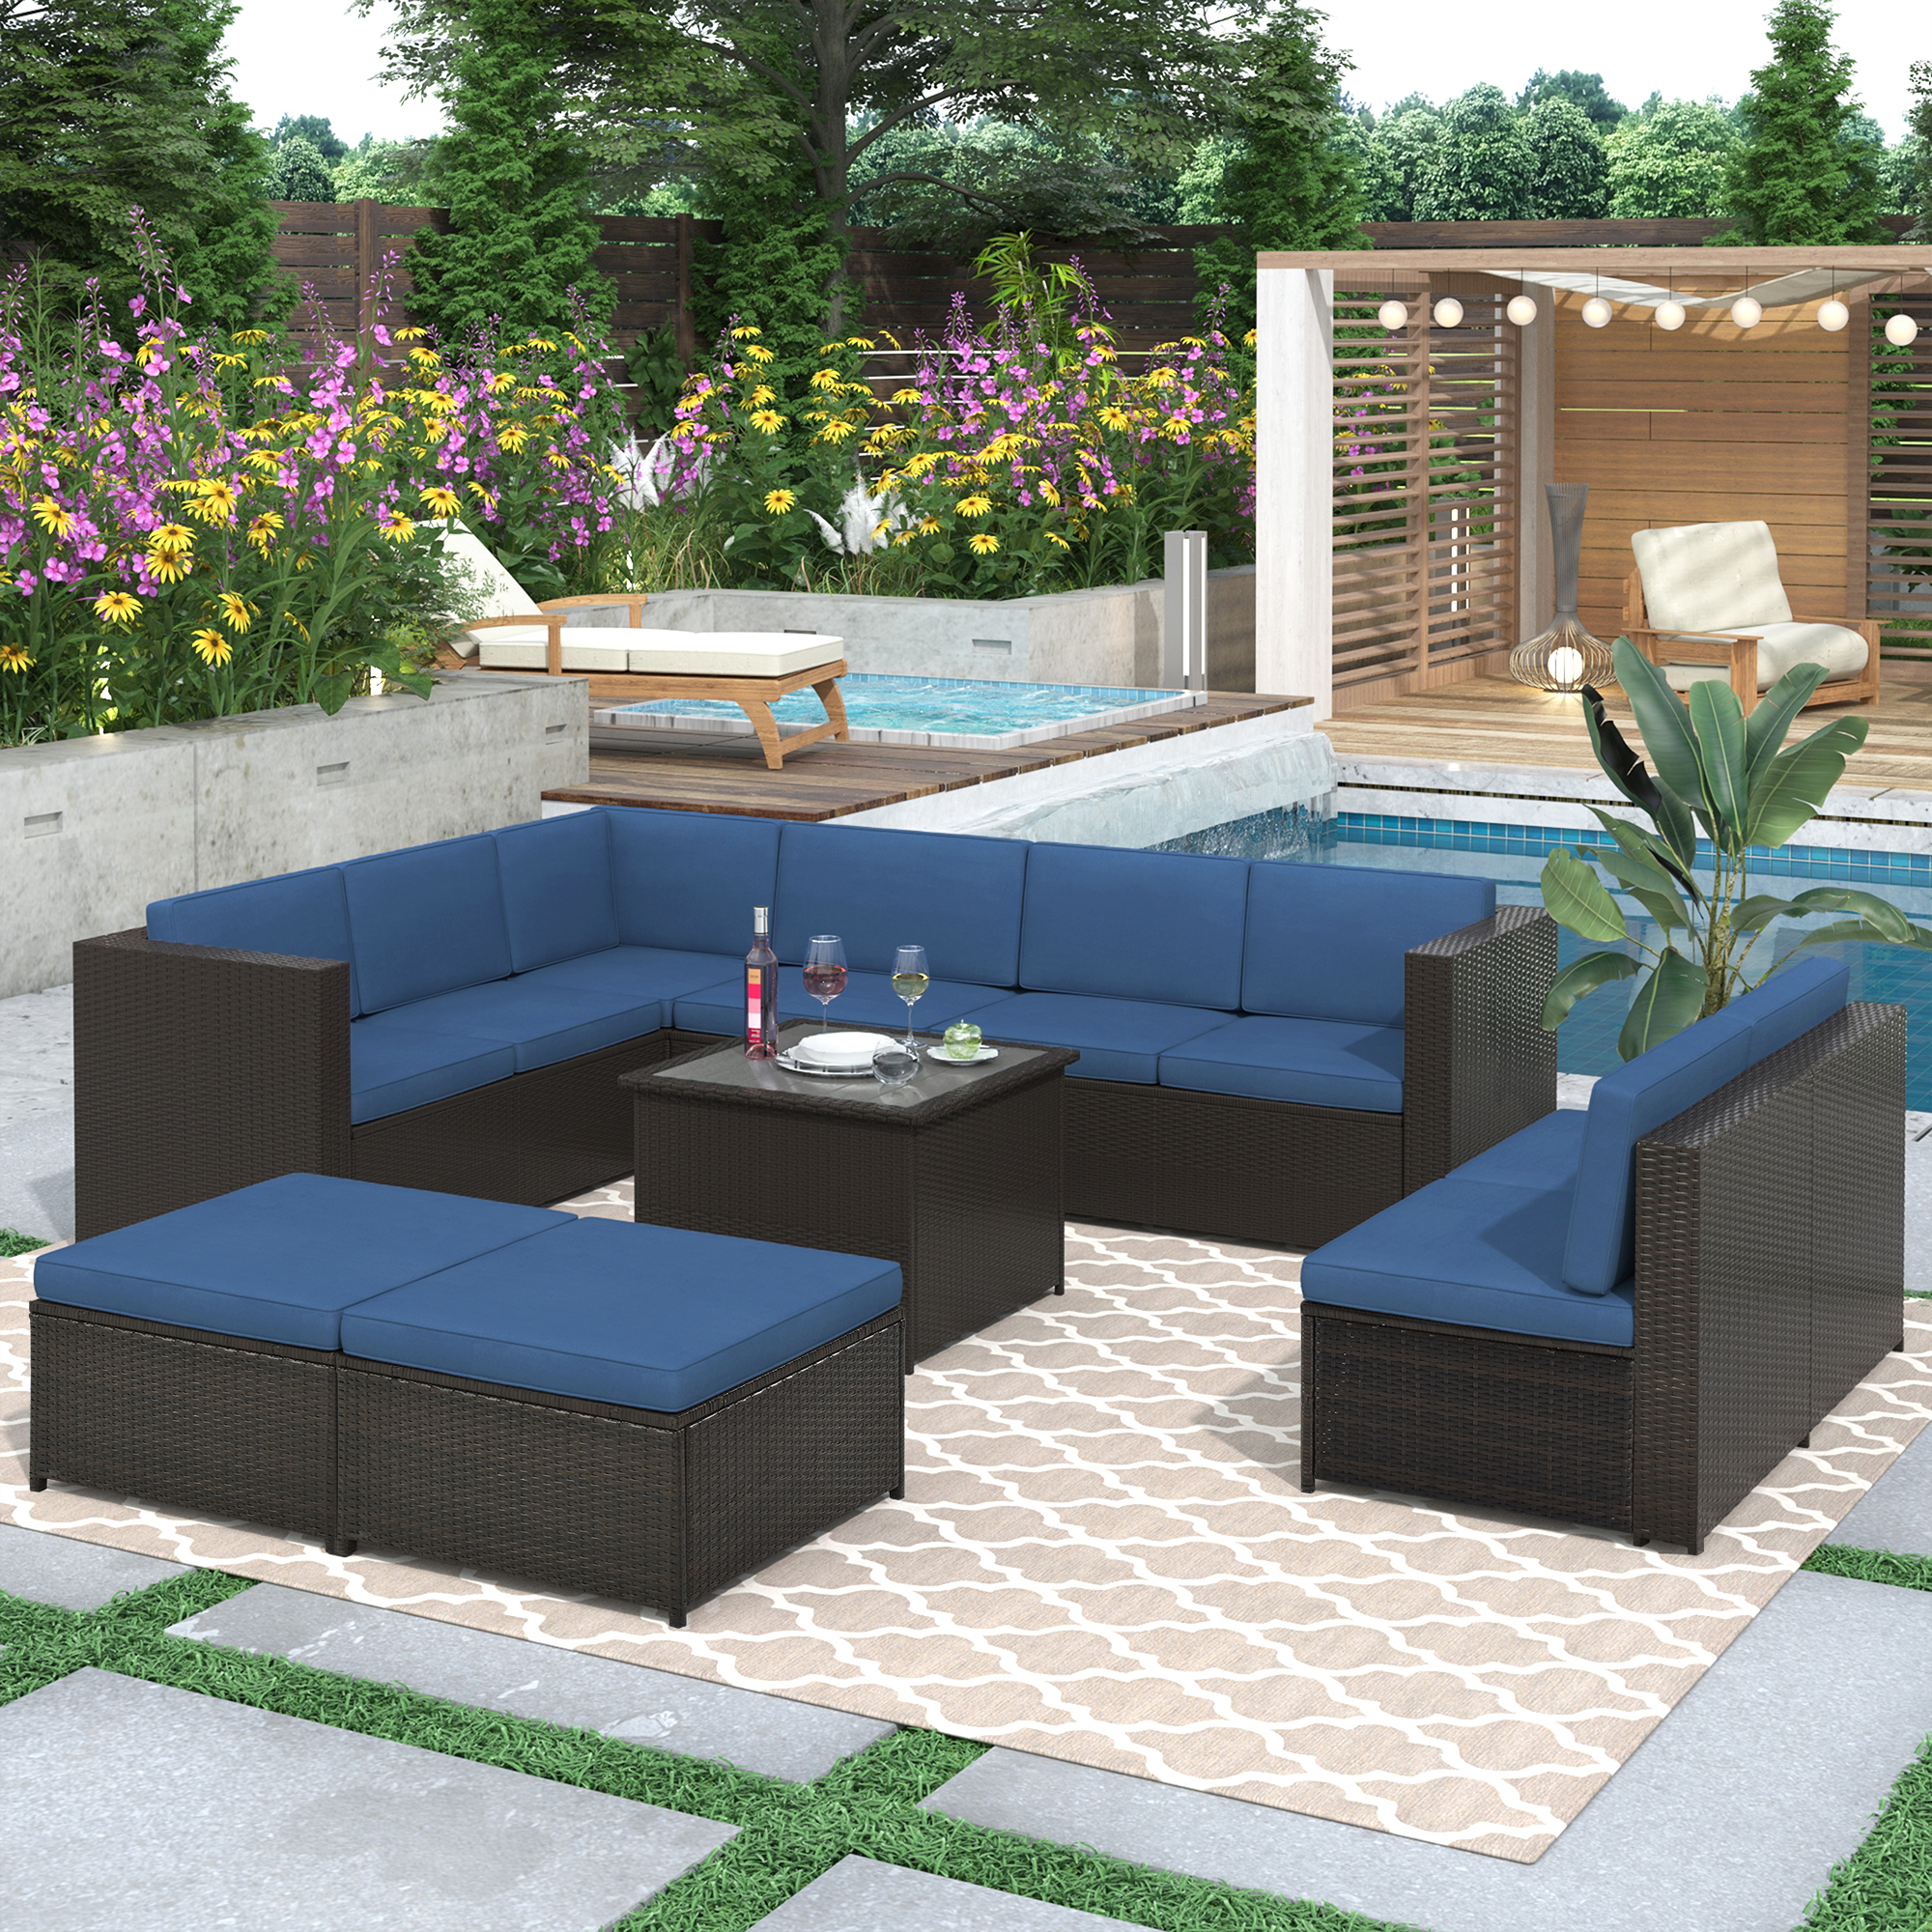 9 Piece Rattan Sectional Seating Group with Cushions and Ottoman, Patio Furniture Sets, Outdoor Wicker Sectional-Boyel Living